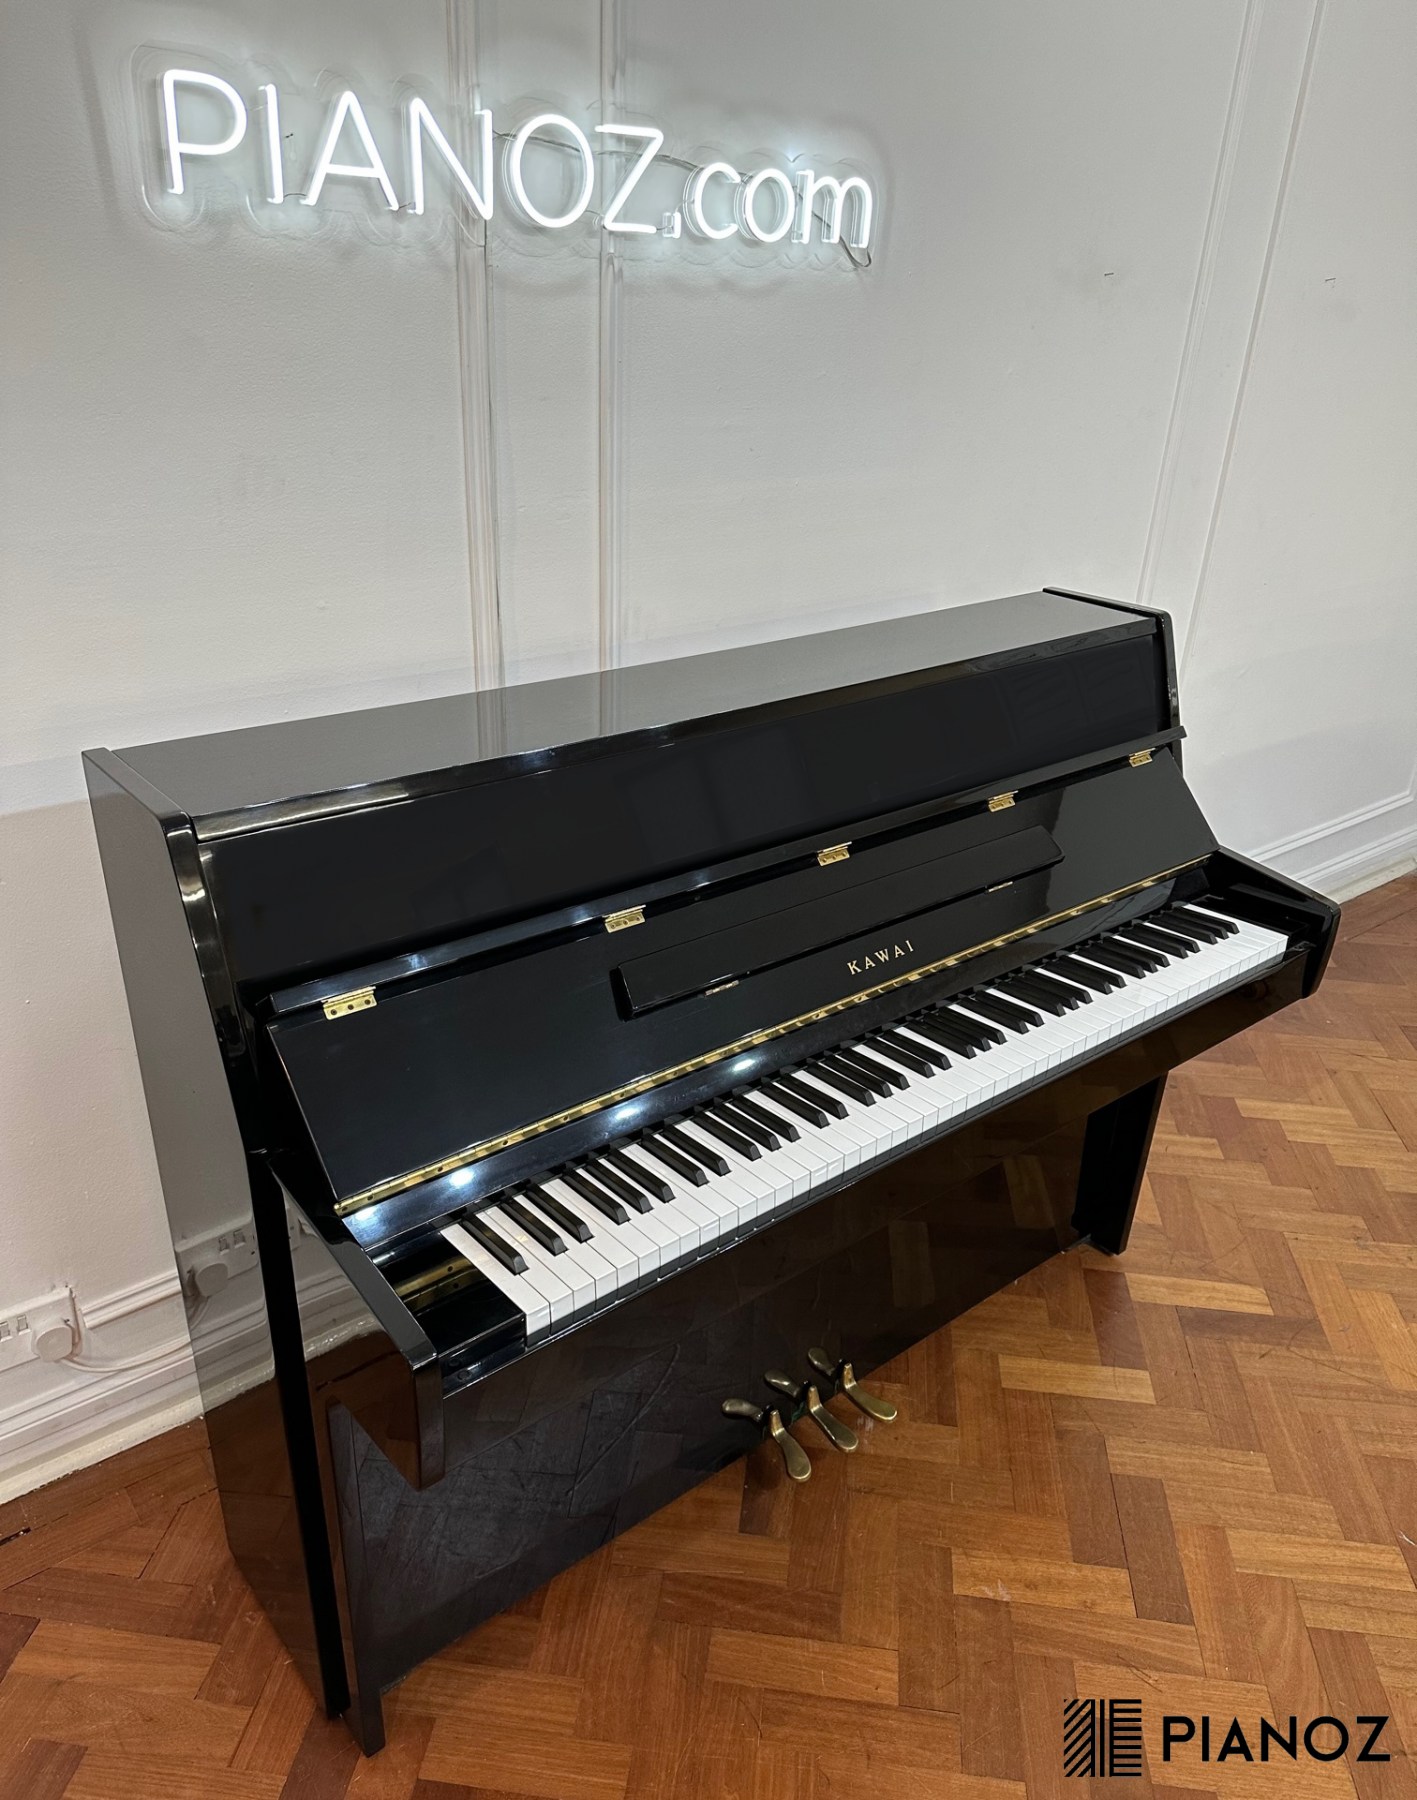 Kawai CE7N Upright Piano piano for sale in UK